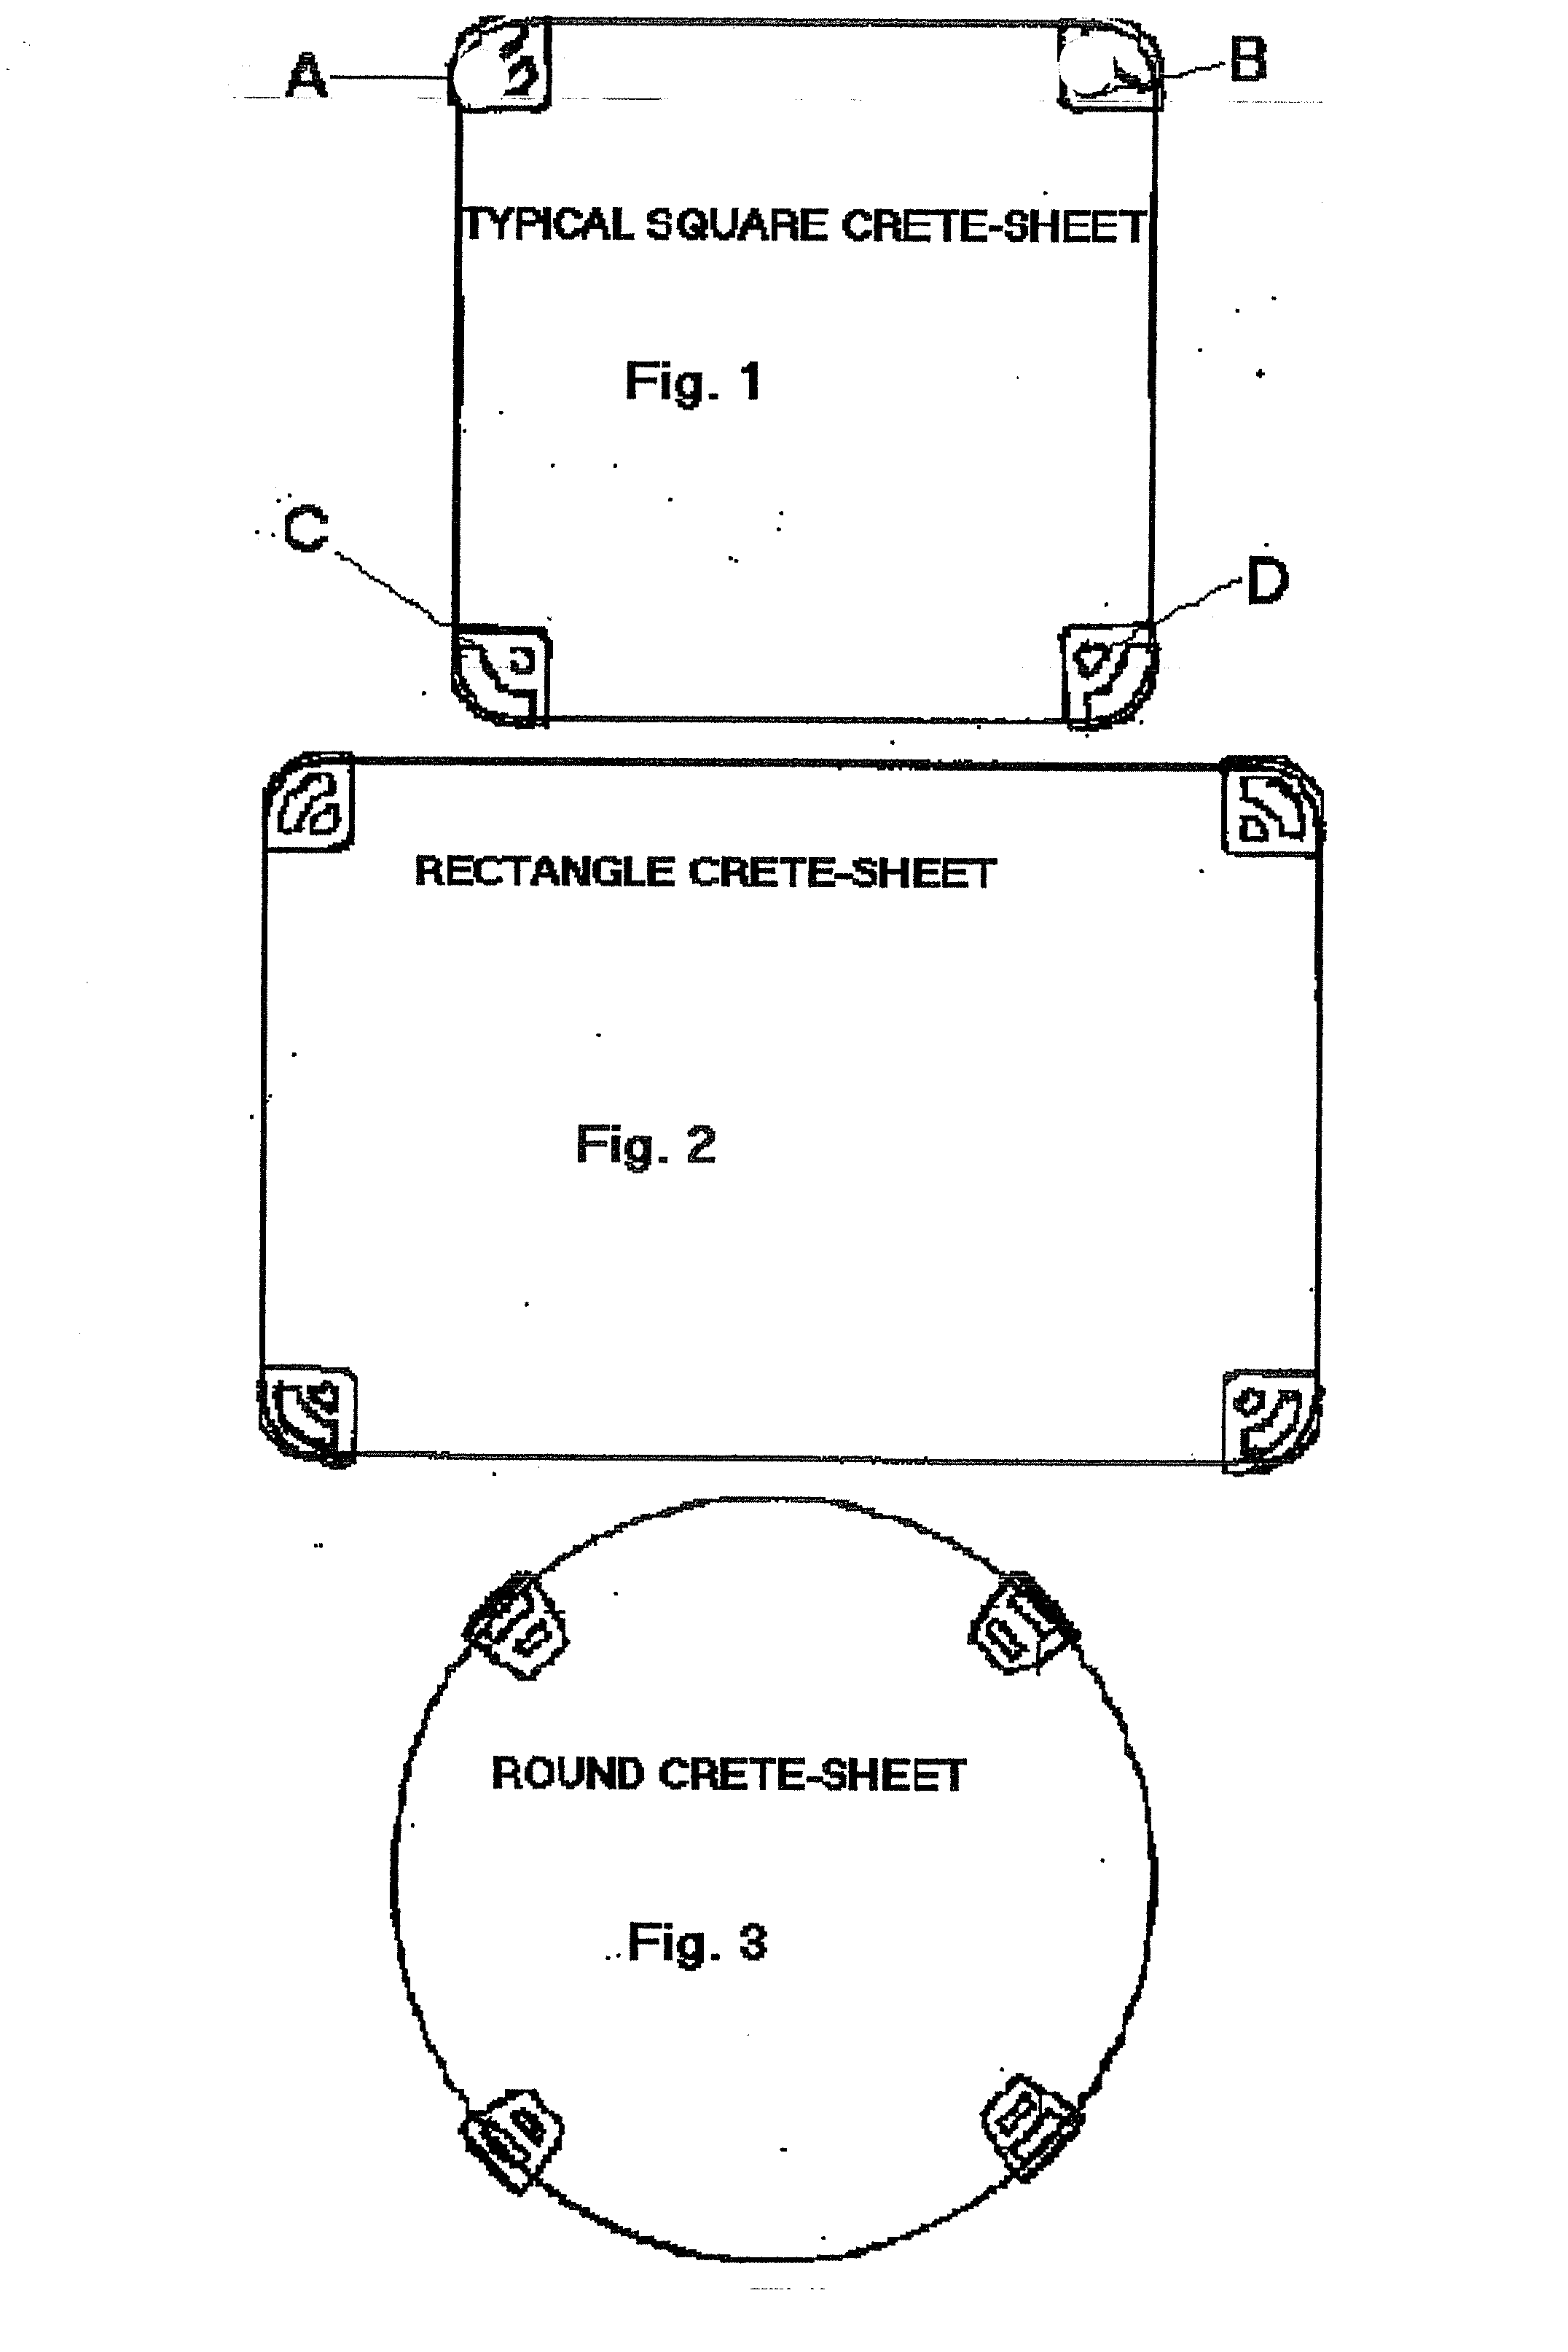 Portable mixing sheet with handles